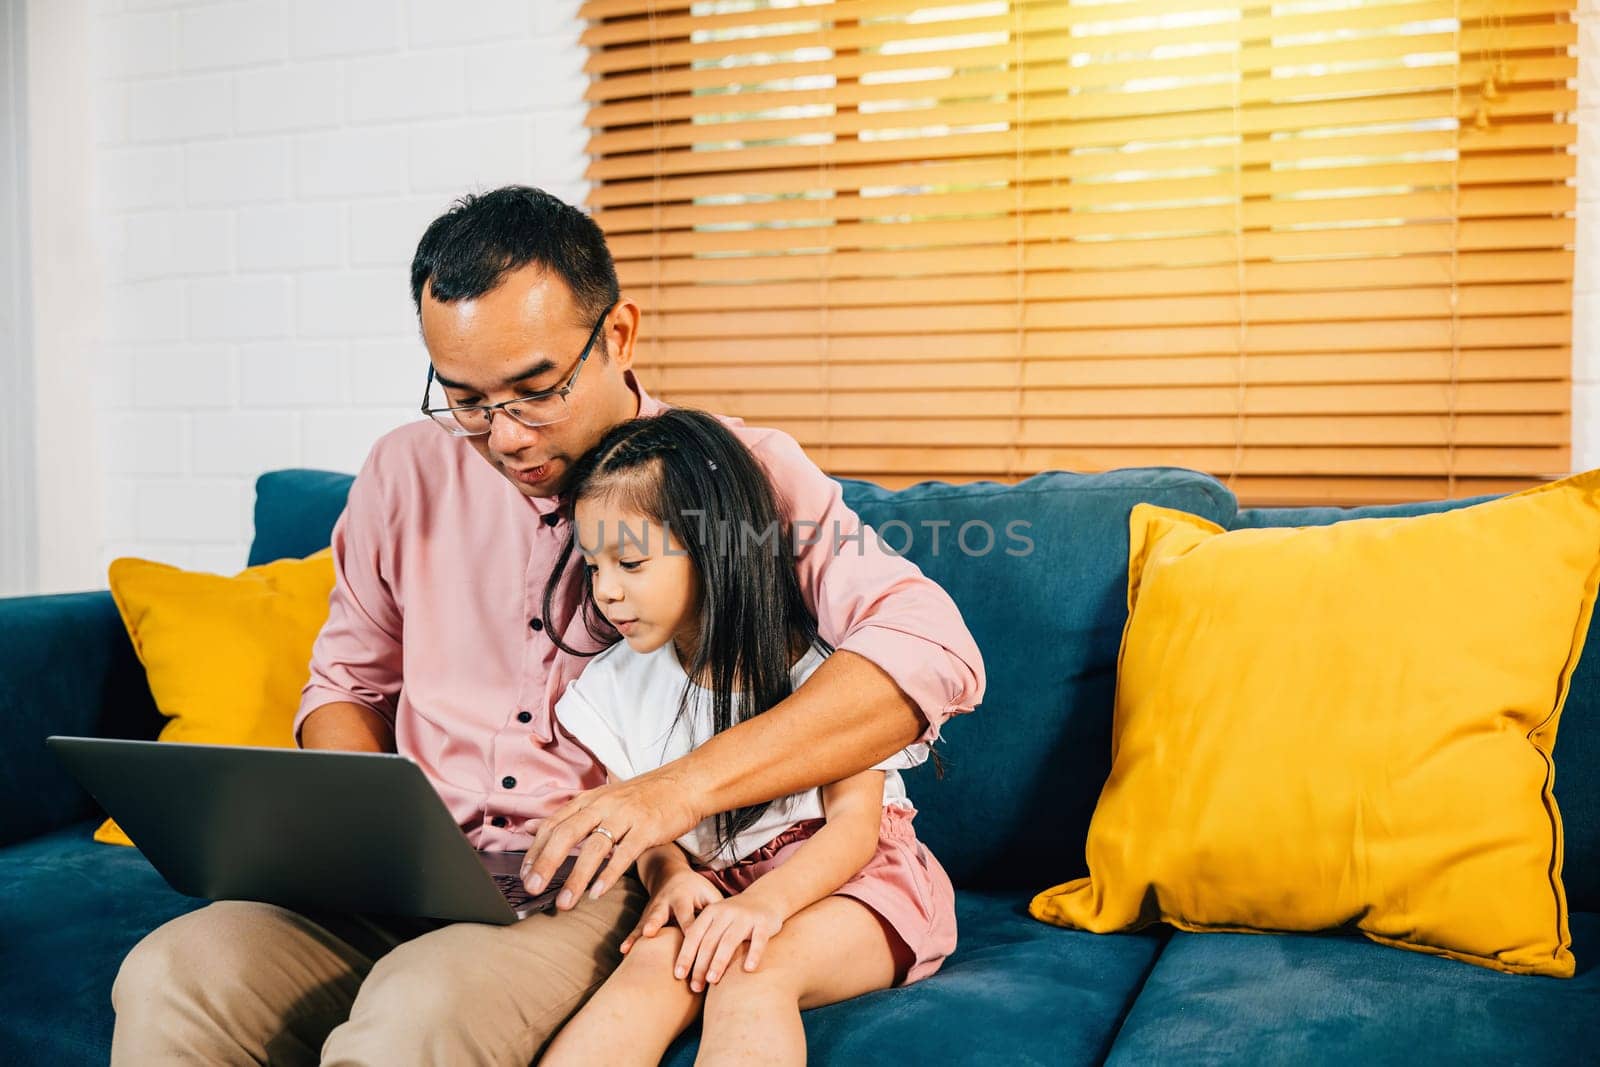 In a modern living room an Asian businessman combines work with family as his daughter uses a computer for e-learning. Their bonding and happiness showcase the essence of togetherness.